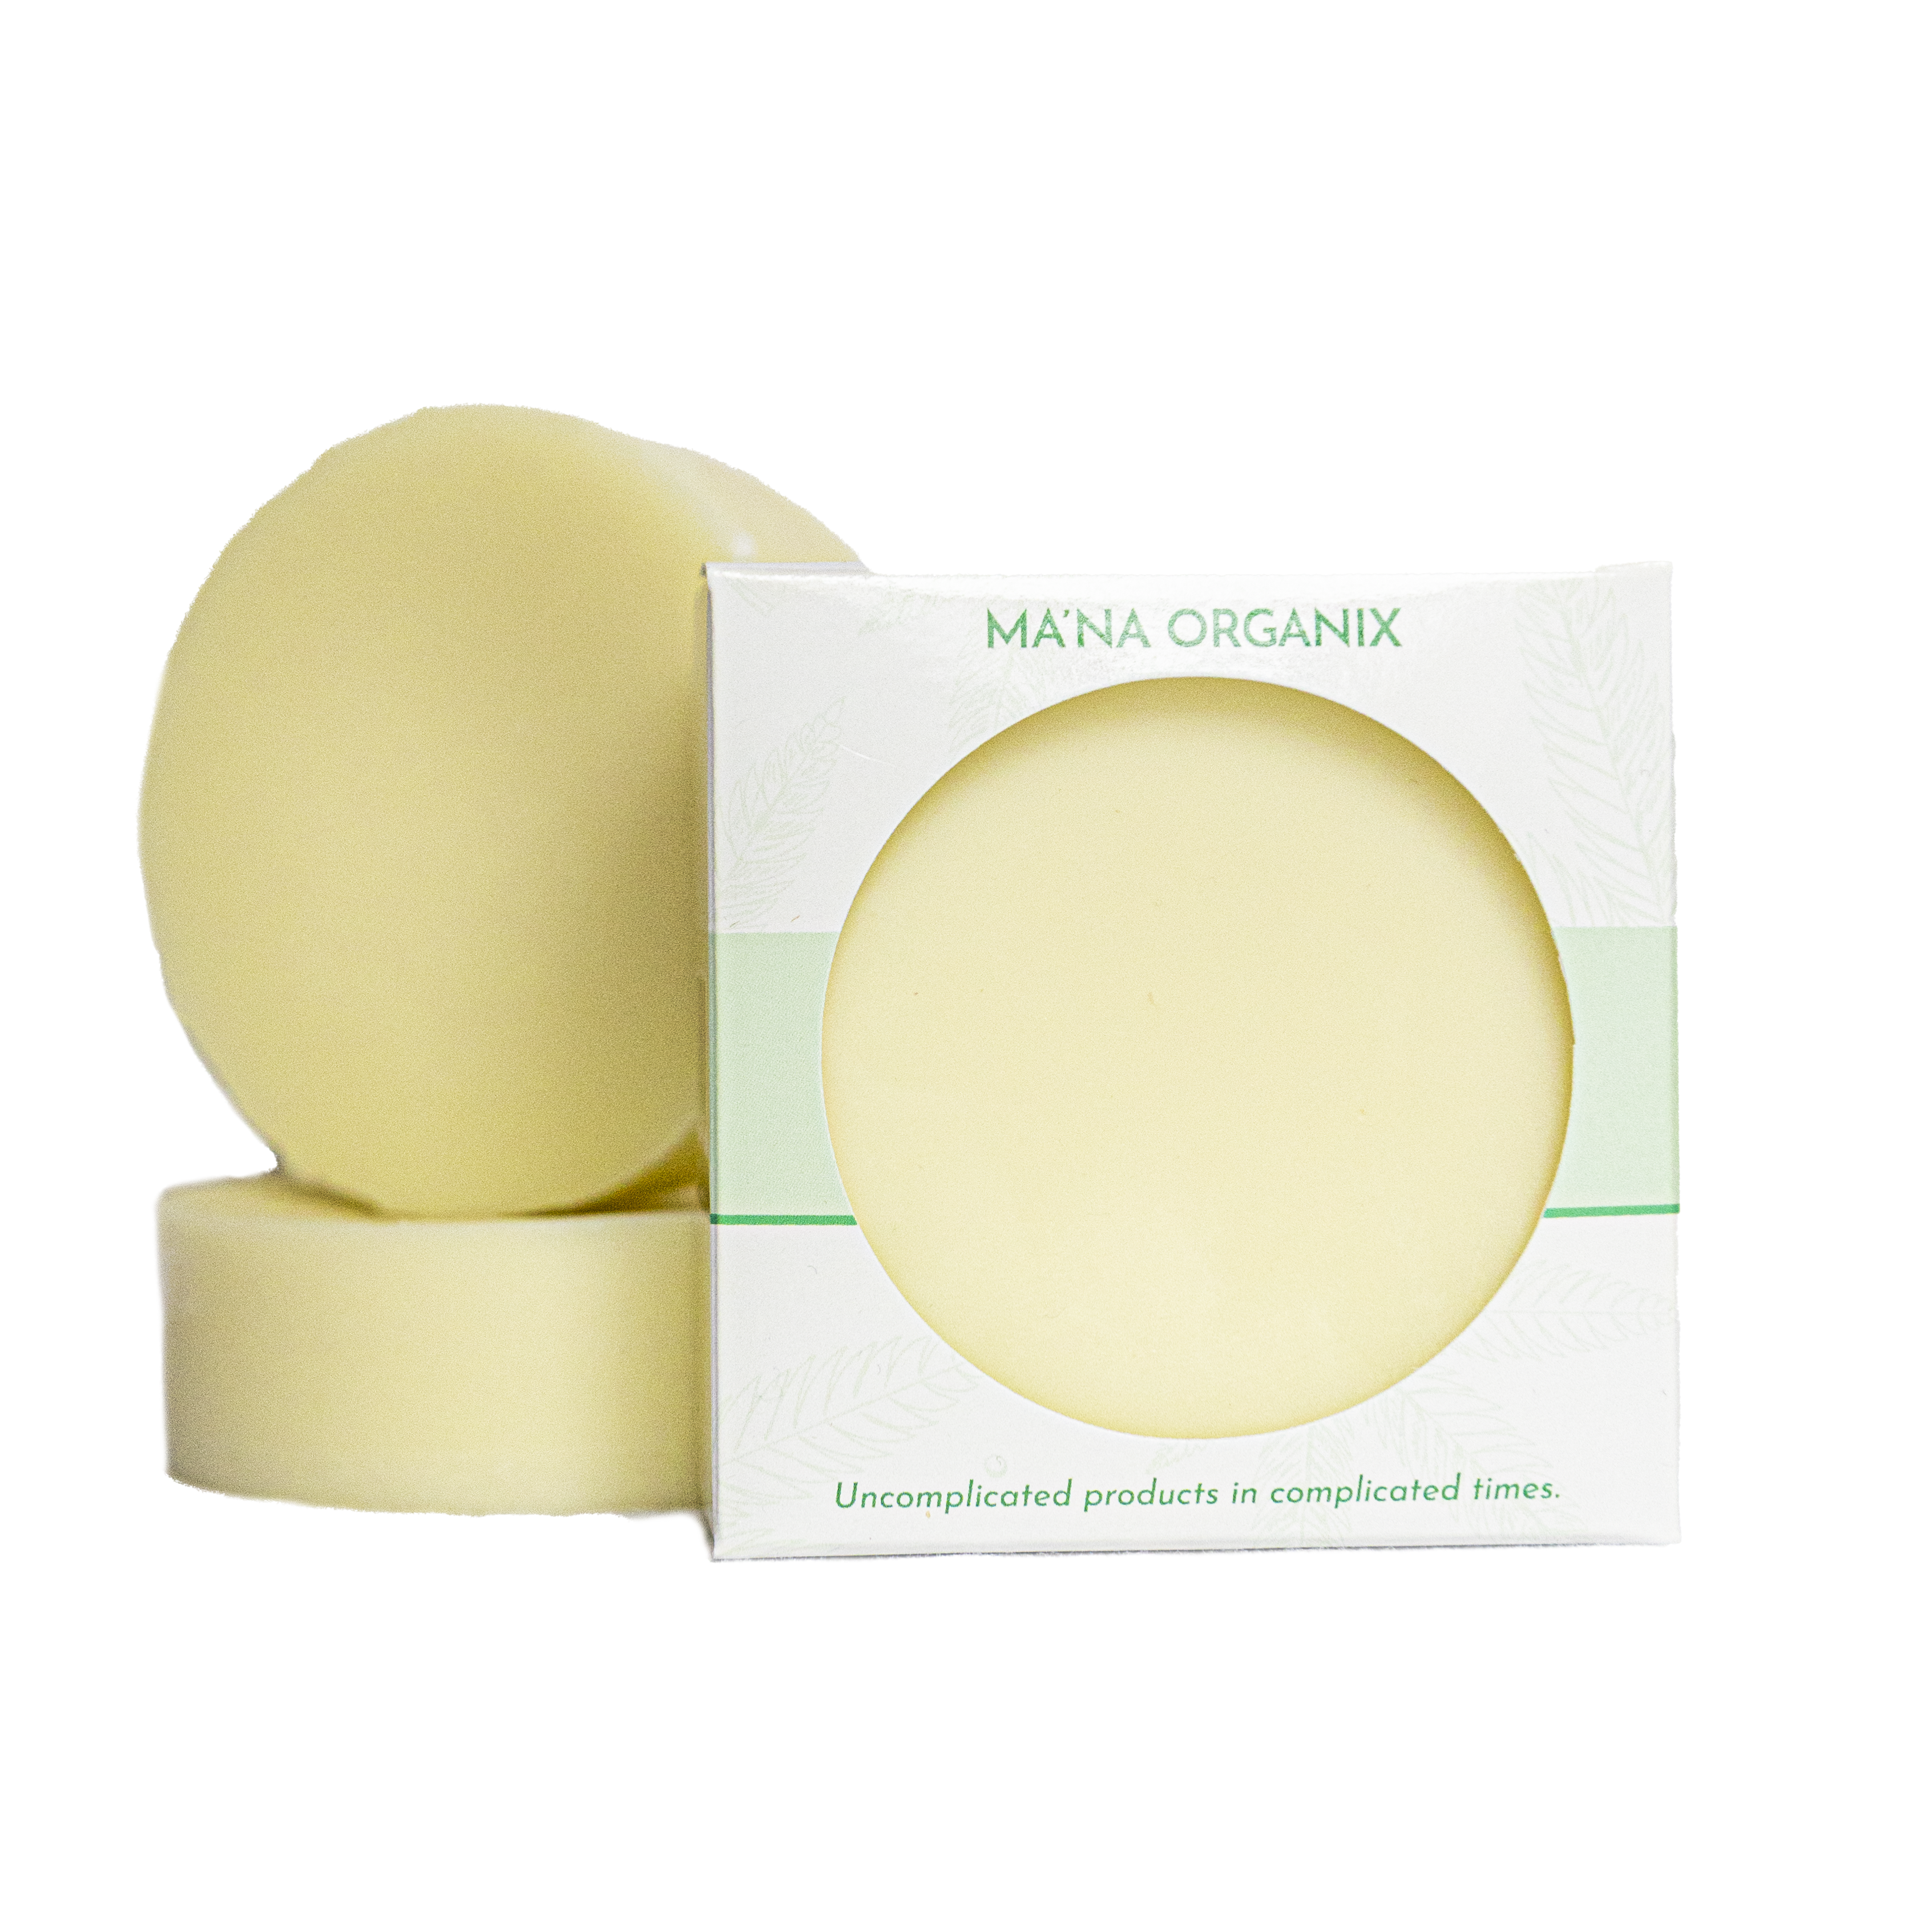 All Natural Hempseed Oil Mint Intensive Therapy Hair Conditioner Bar